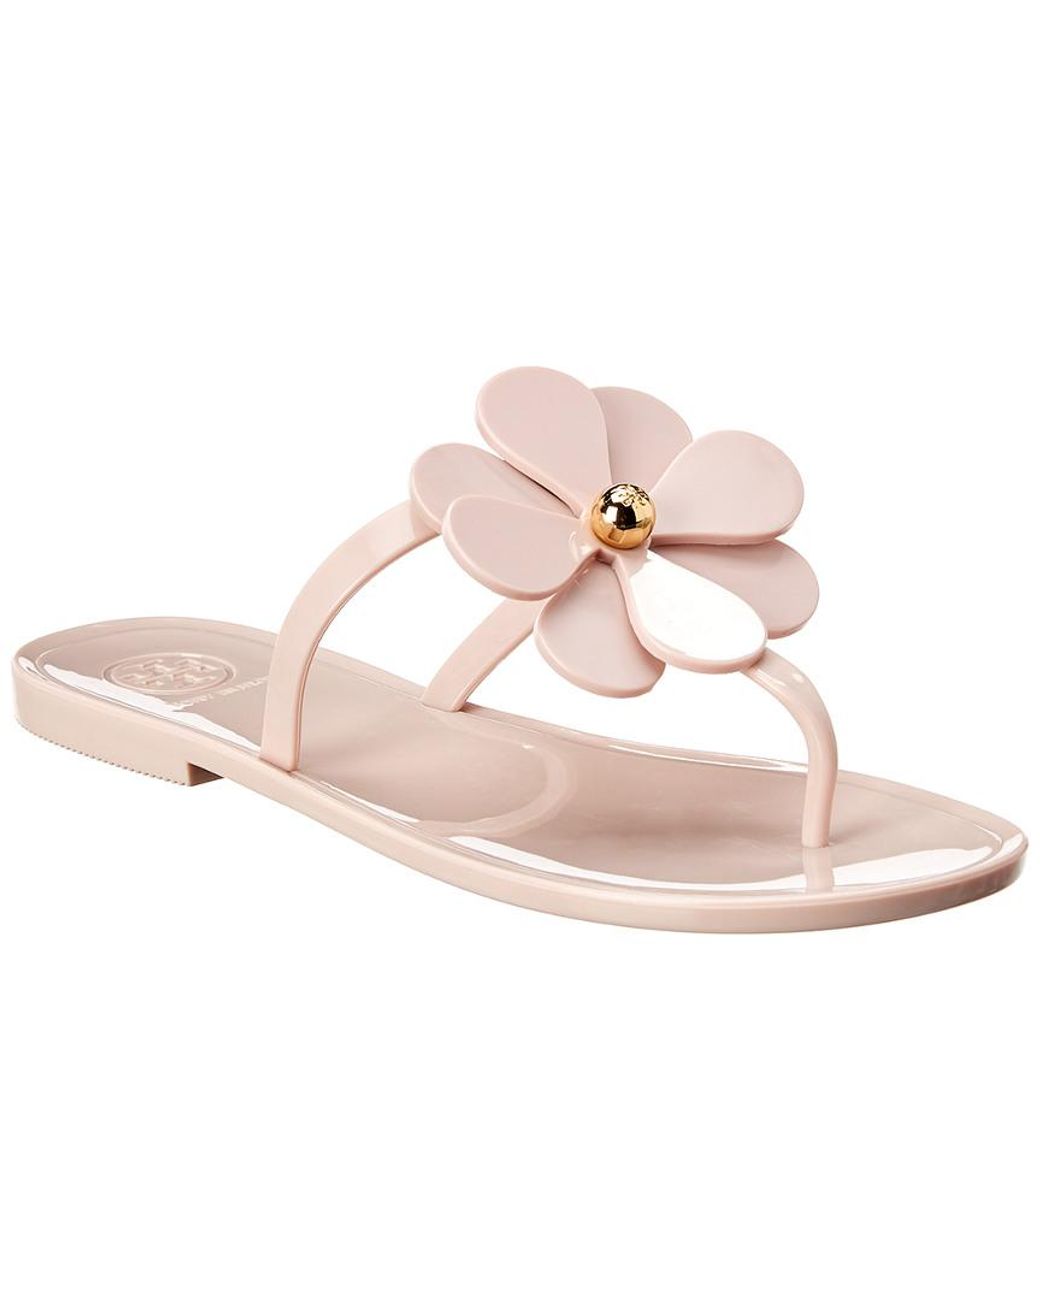 Tory Burch Flower Jelly Sandals in Pink | Lyst